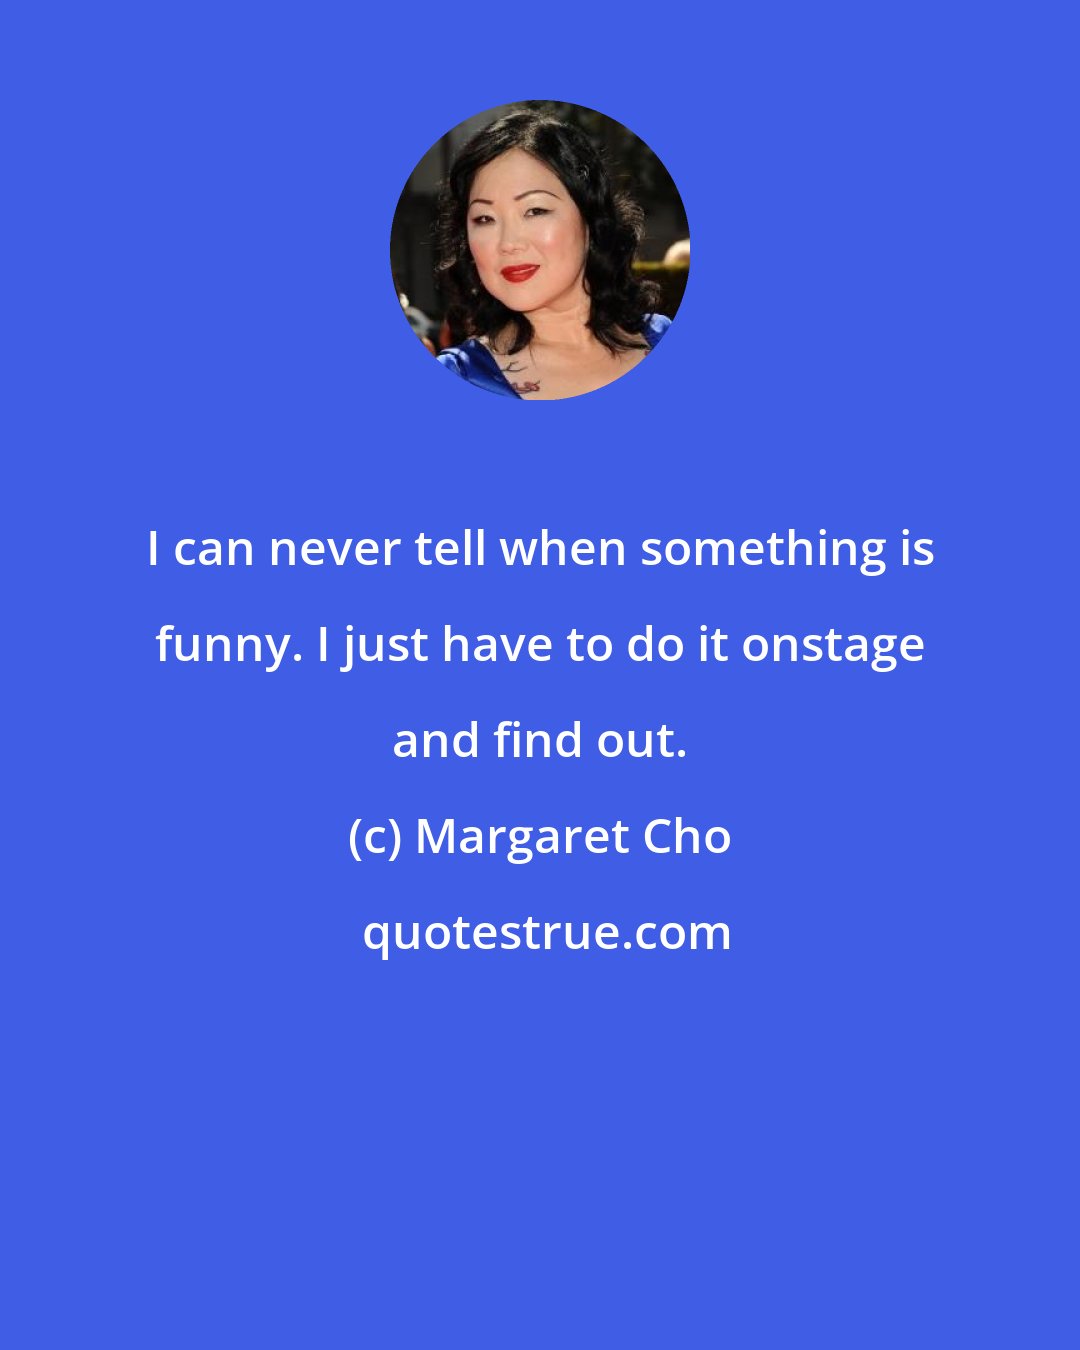 Margaret Cho: I can never tell when something is funny. I just have to do it onstage and find out.